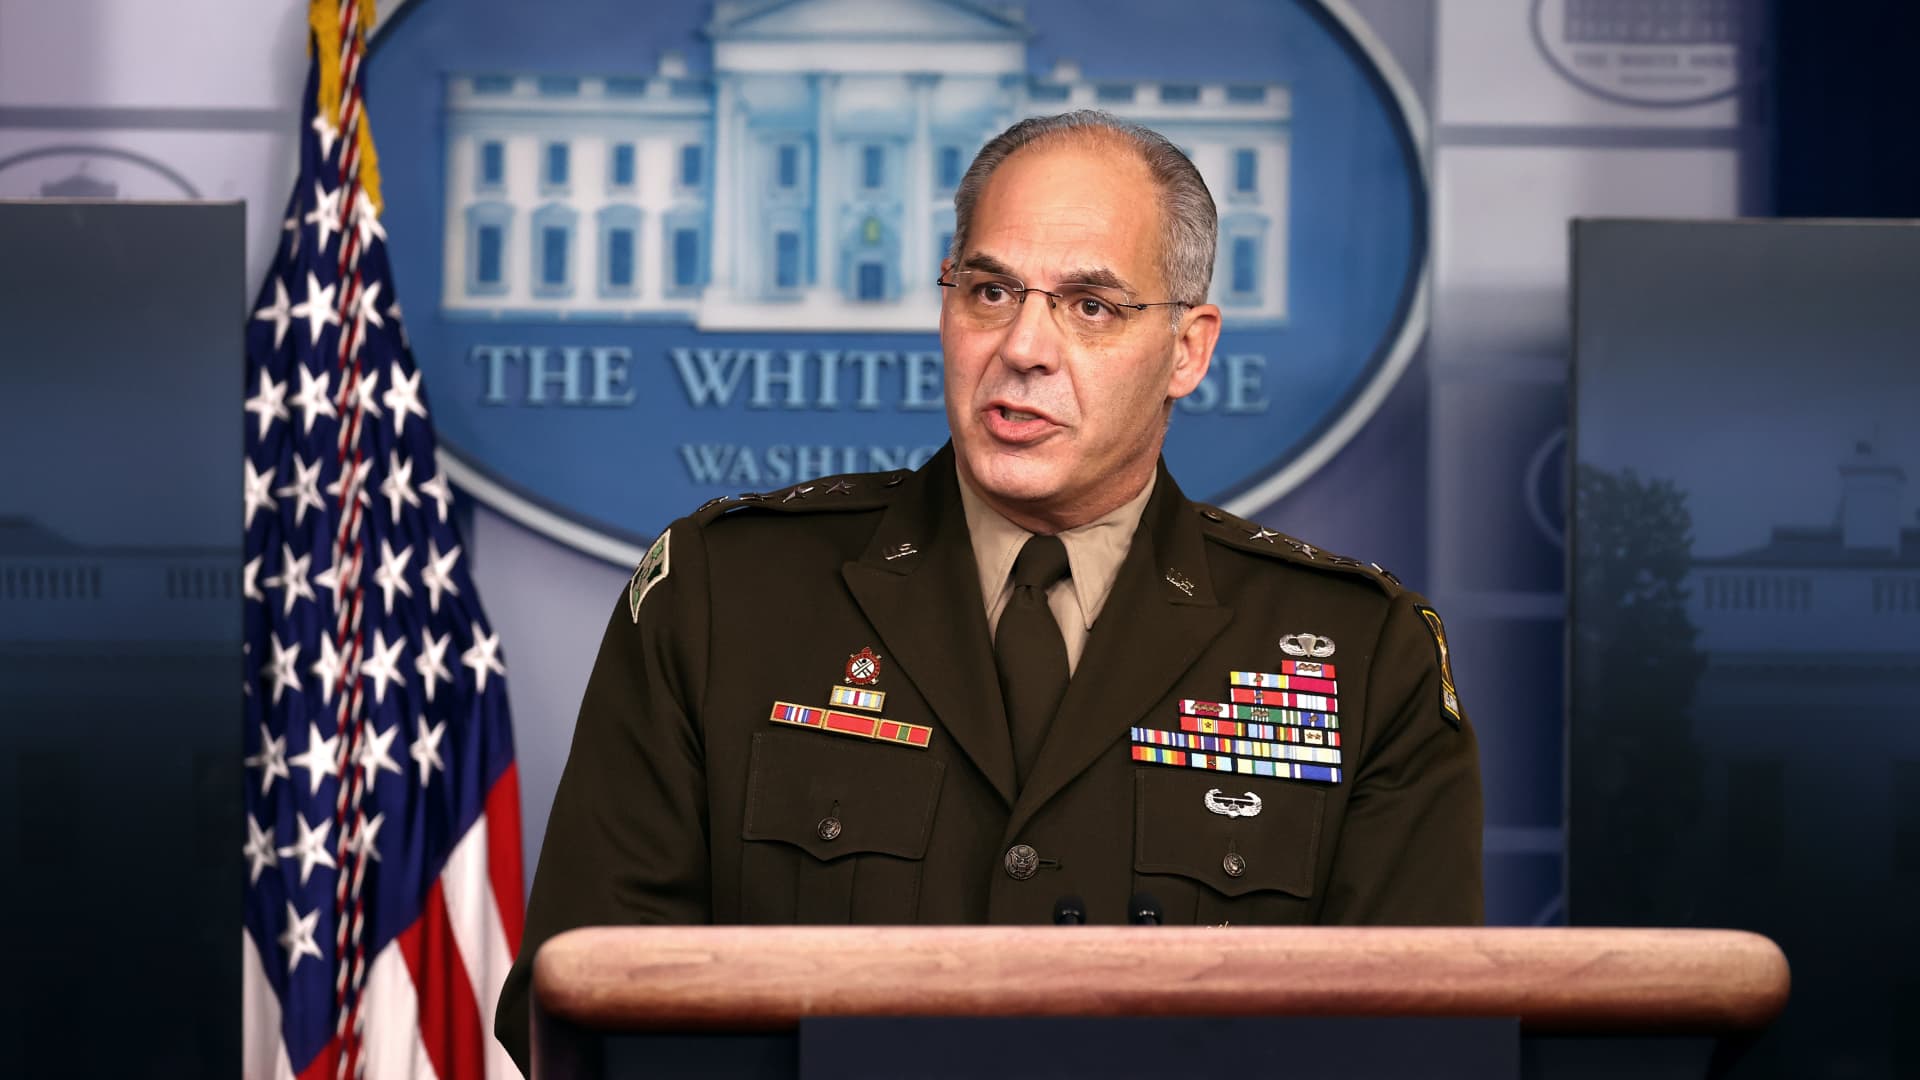 General Gustave Perna, chief operating officer for the Defense Department's Project Warp Speed, speaks during a White House Coronavirus Task Force press briefing in the James Brady Press Briefing Room at the White House on November 19, 2020 in Washington, DC.